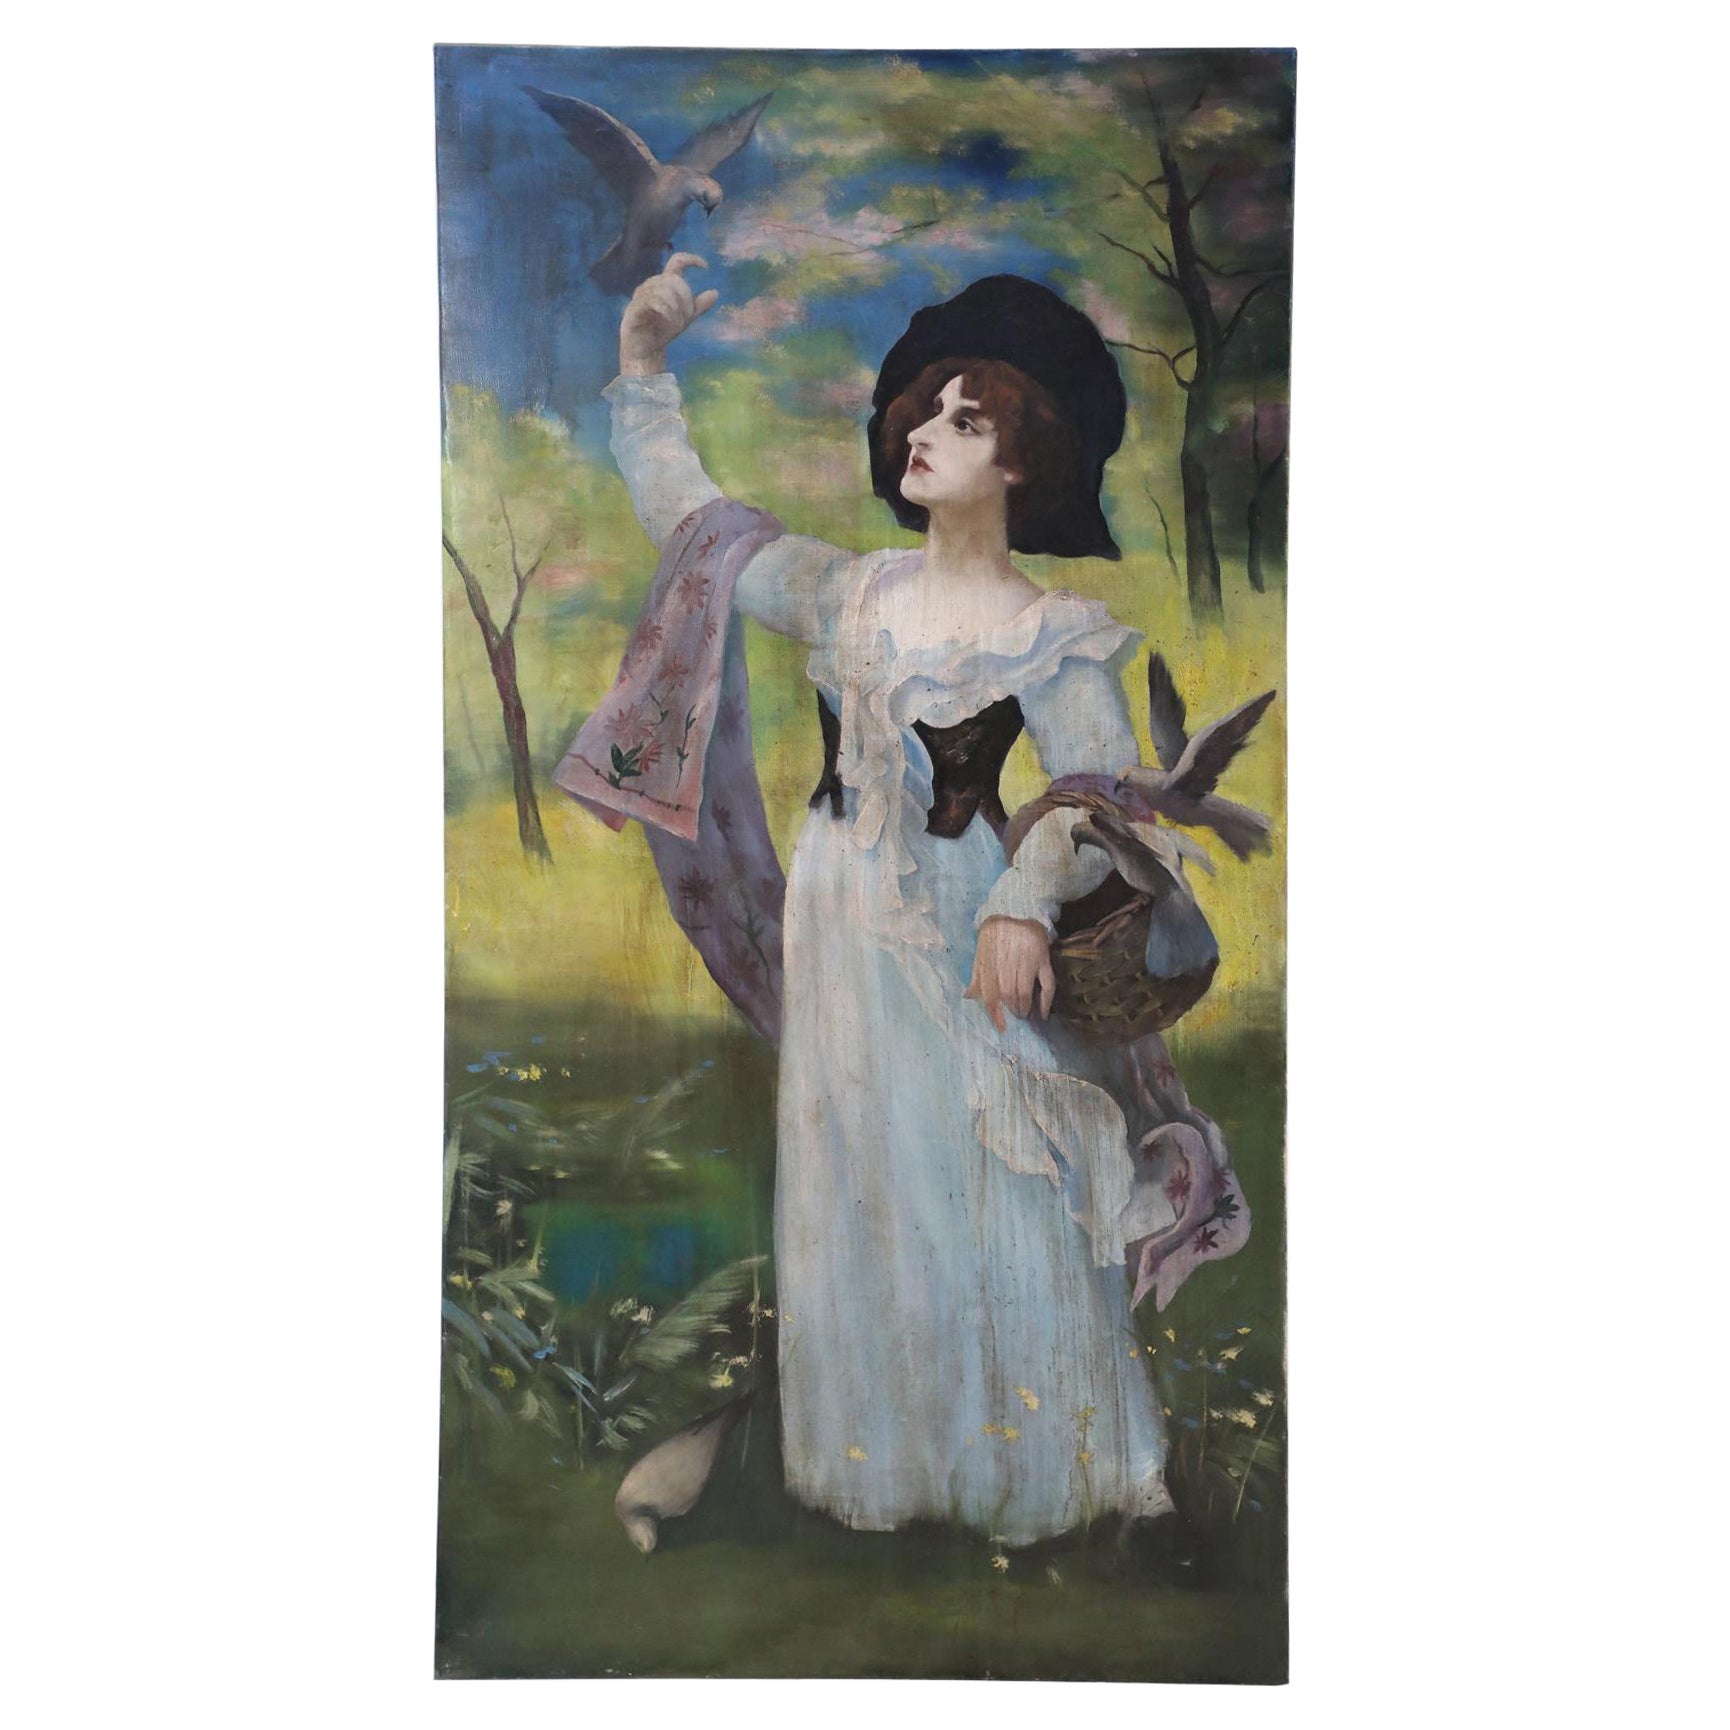 Portrait of a Woman with Bird Painting on Canvas